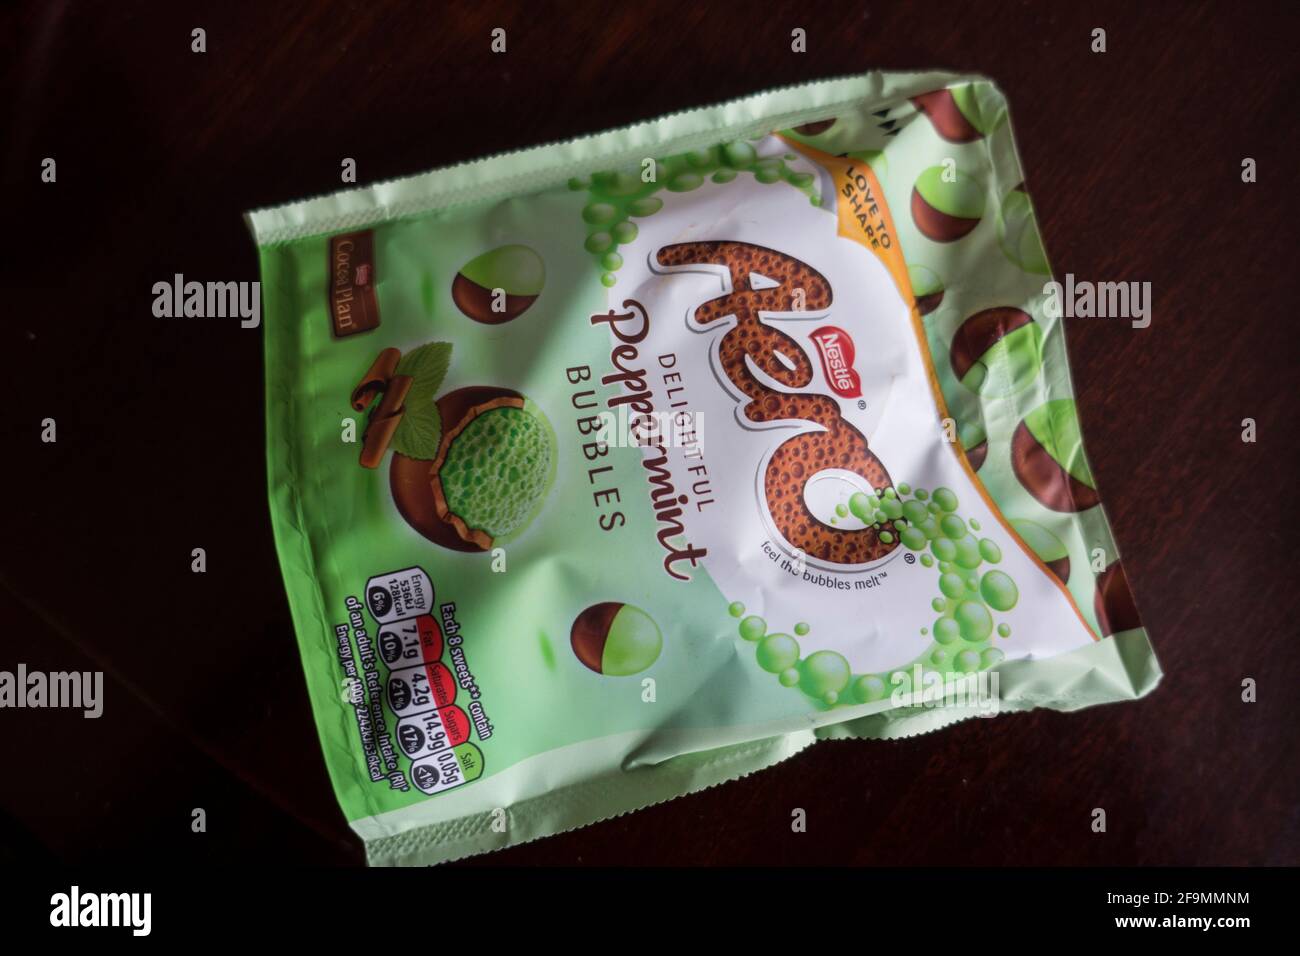 Packet of Aero Peppermint Bubbles chocolate. Stock Photo